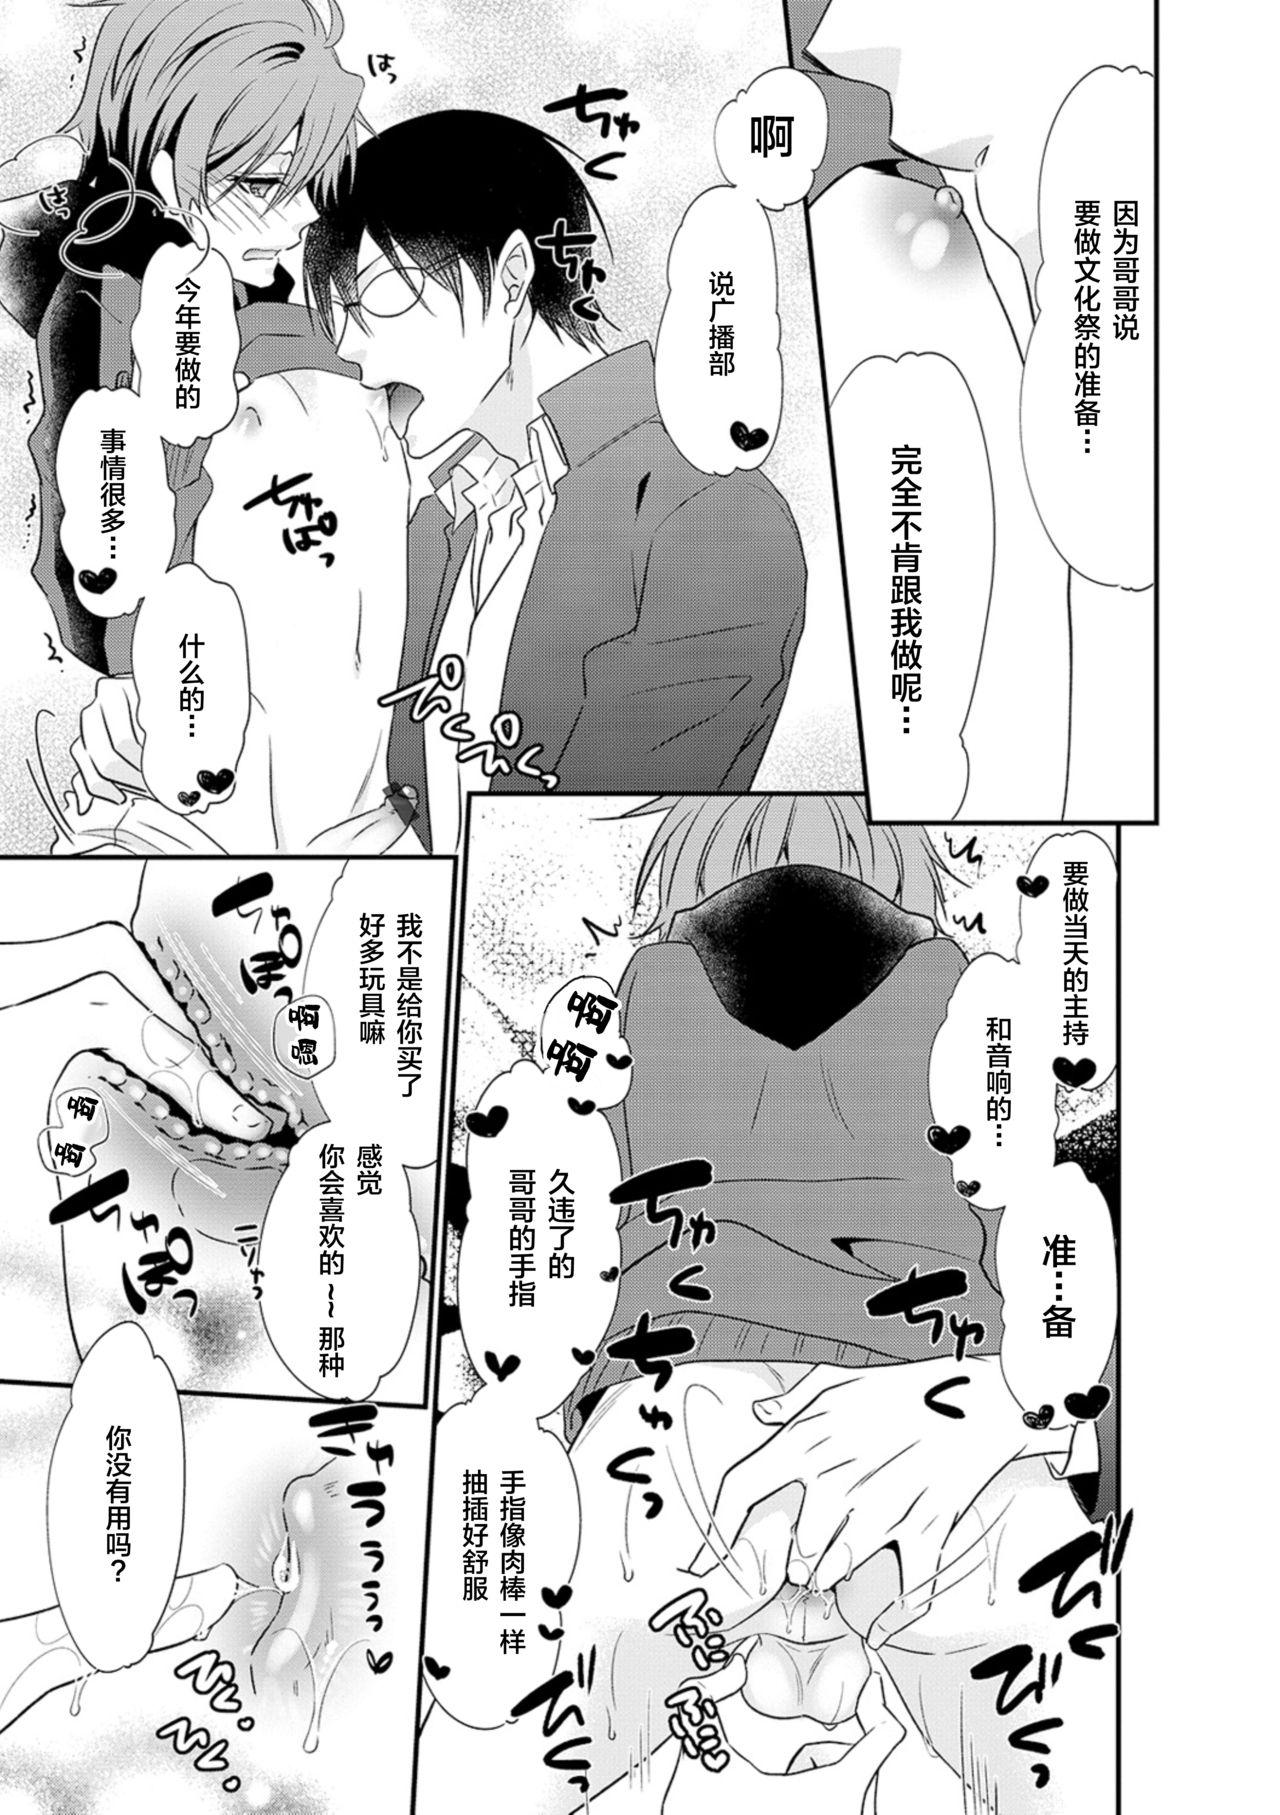 Gay Emo [Naokichi.] Otouto-tachi no Bouken - Indecent brothers adventure Ch. 1-3 [Chinese] [逃亡者×新桥月白日语社] [Digital] Free Amature Porn - Page 7